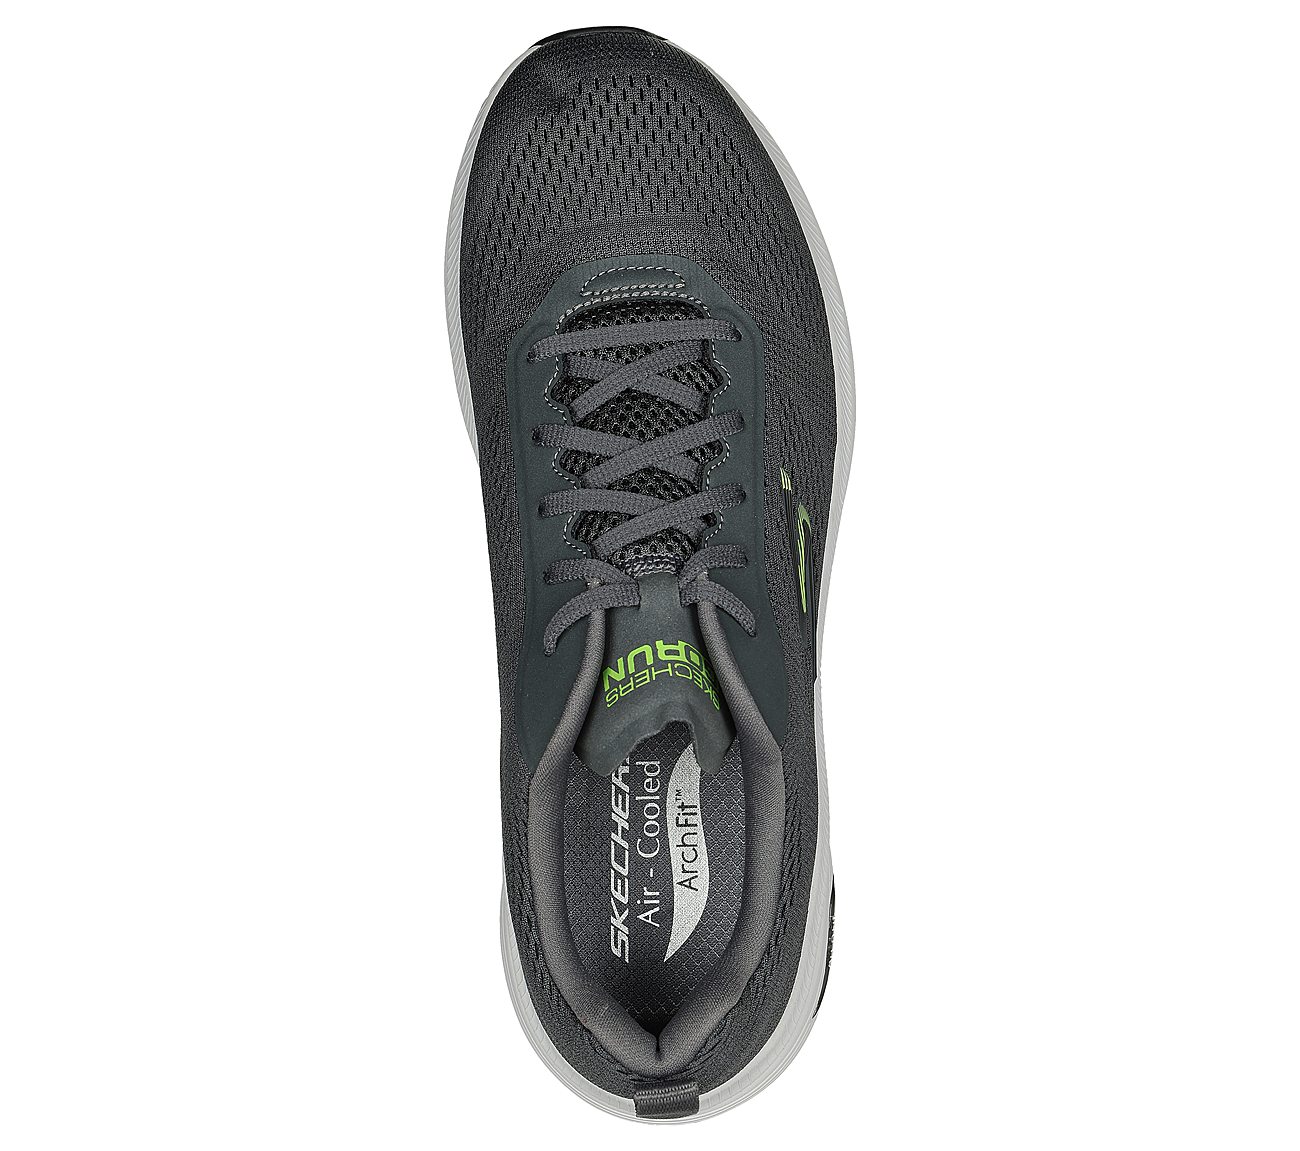 GO RUN ARCH FIT, CHARCOAL/BLACK Footwear Top View